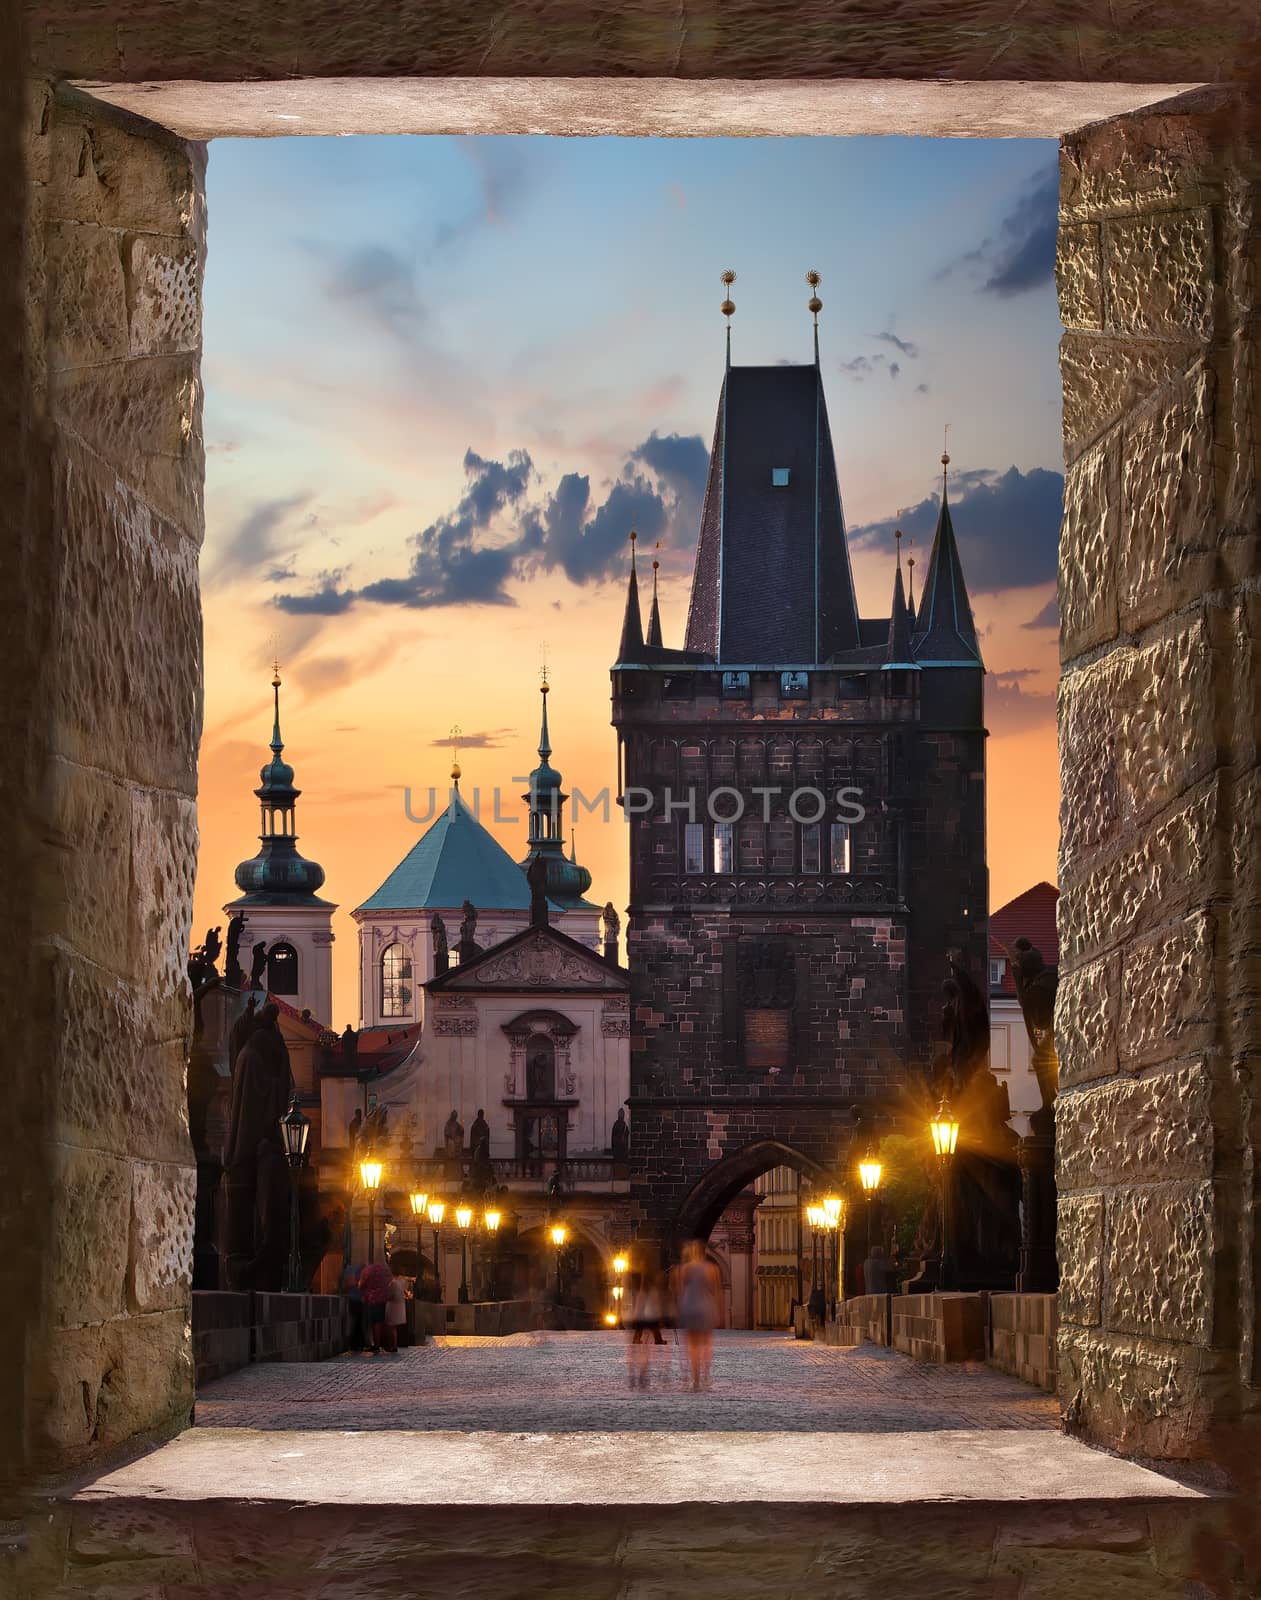 View from the ancient window to the Charles Bridge